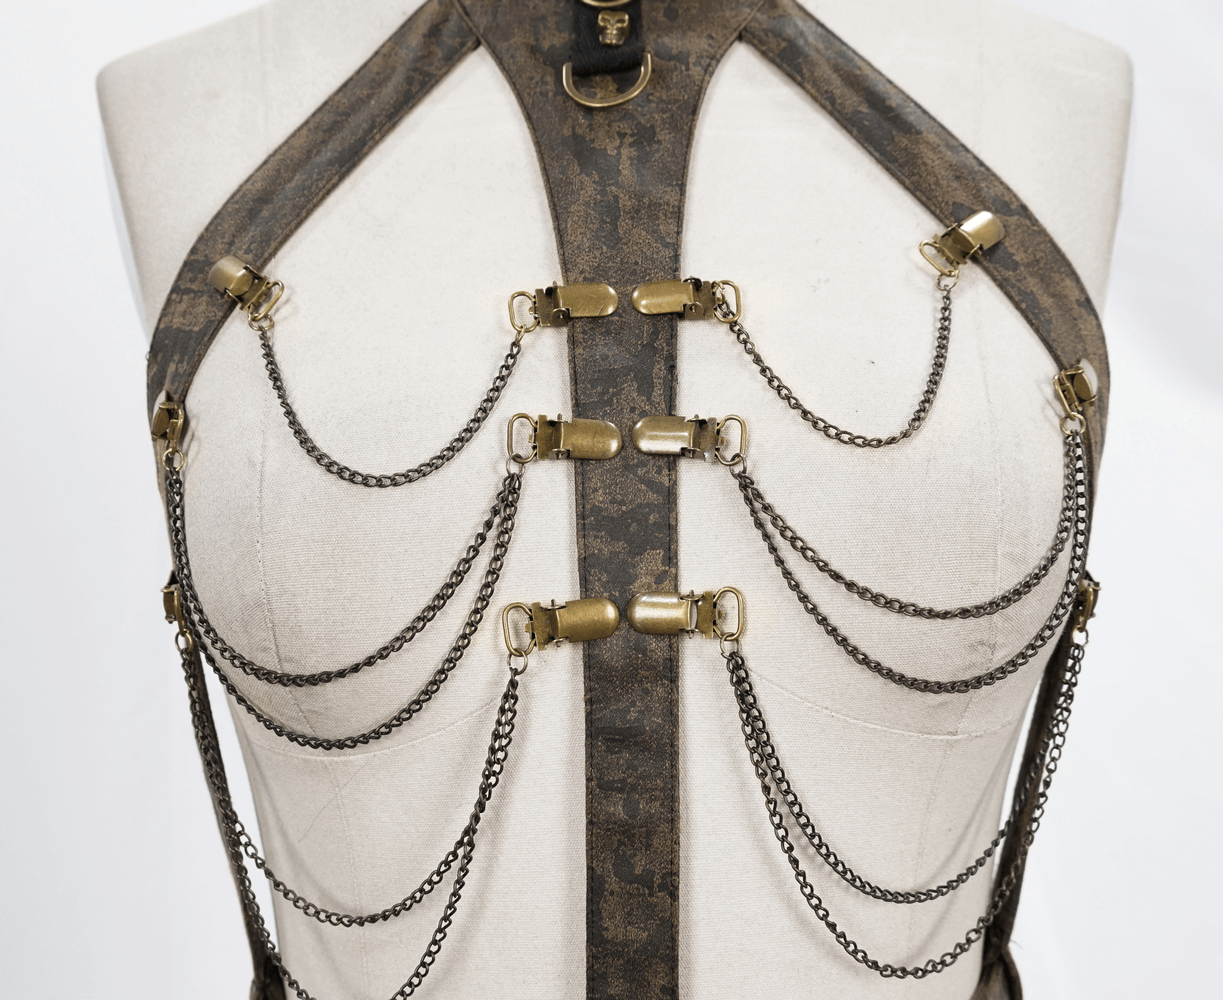 Unique Gothic Body Harness with Metal Chains / Women Bra Top Chest Witch Accessory - HARD'N'HEAVY